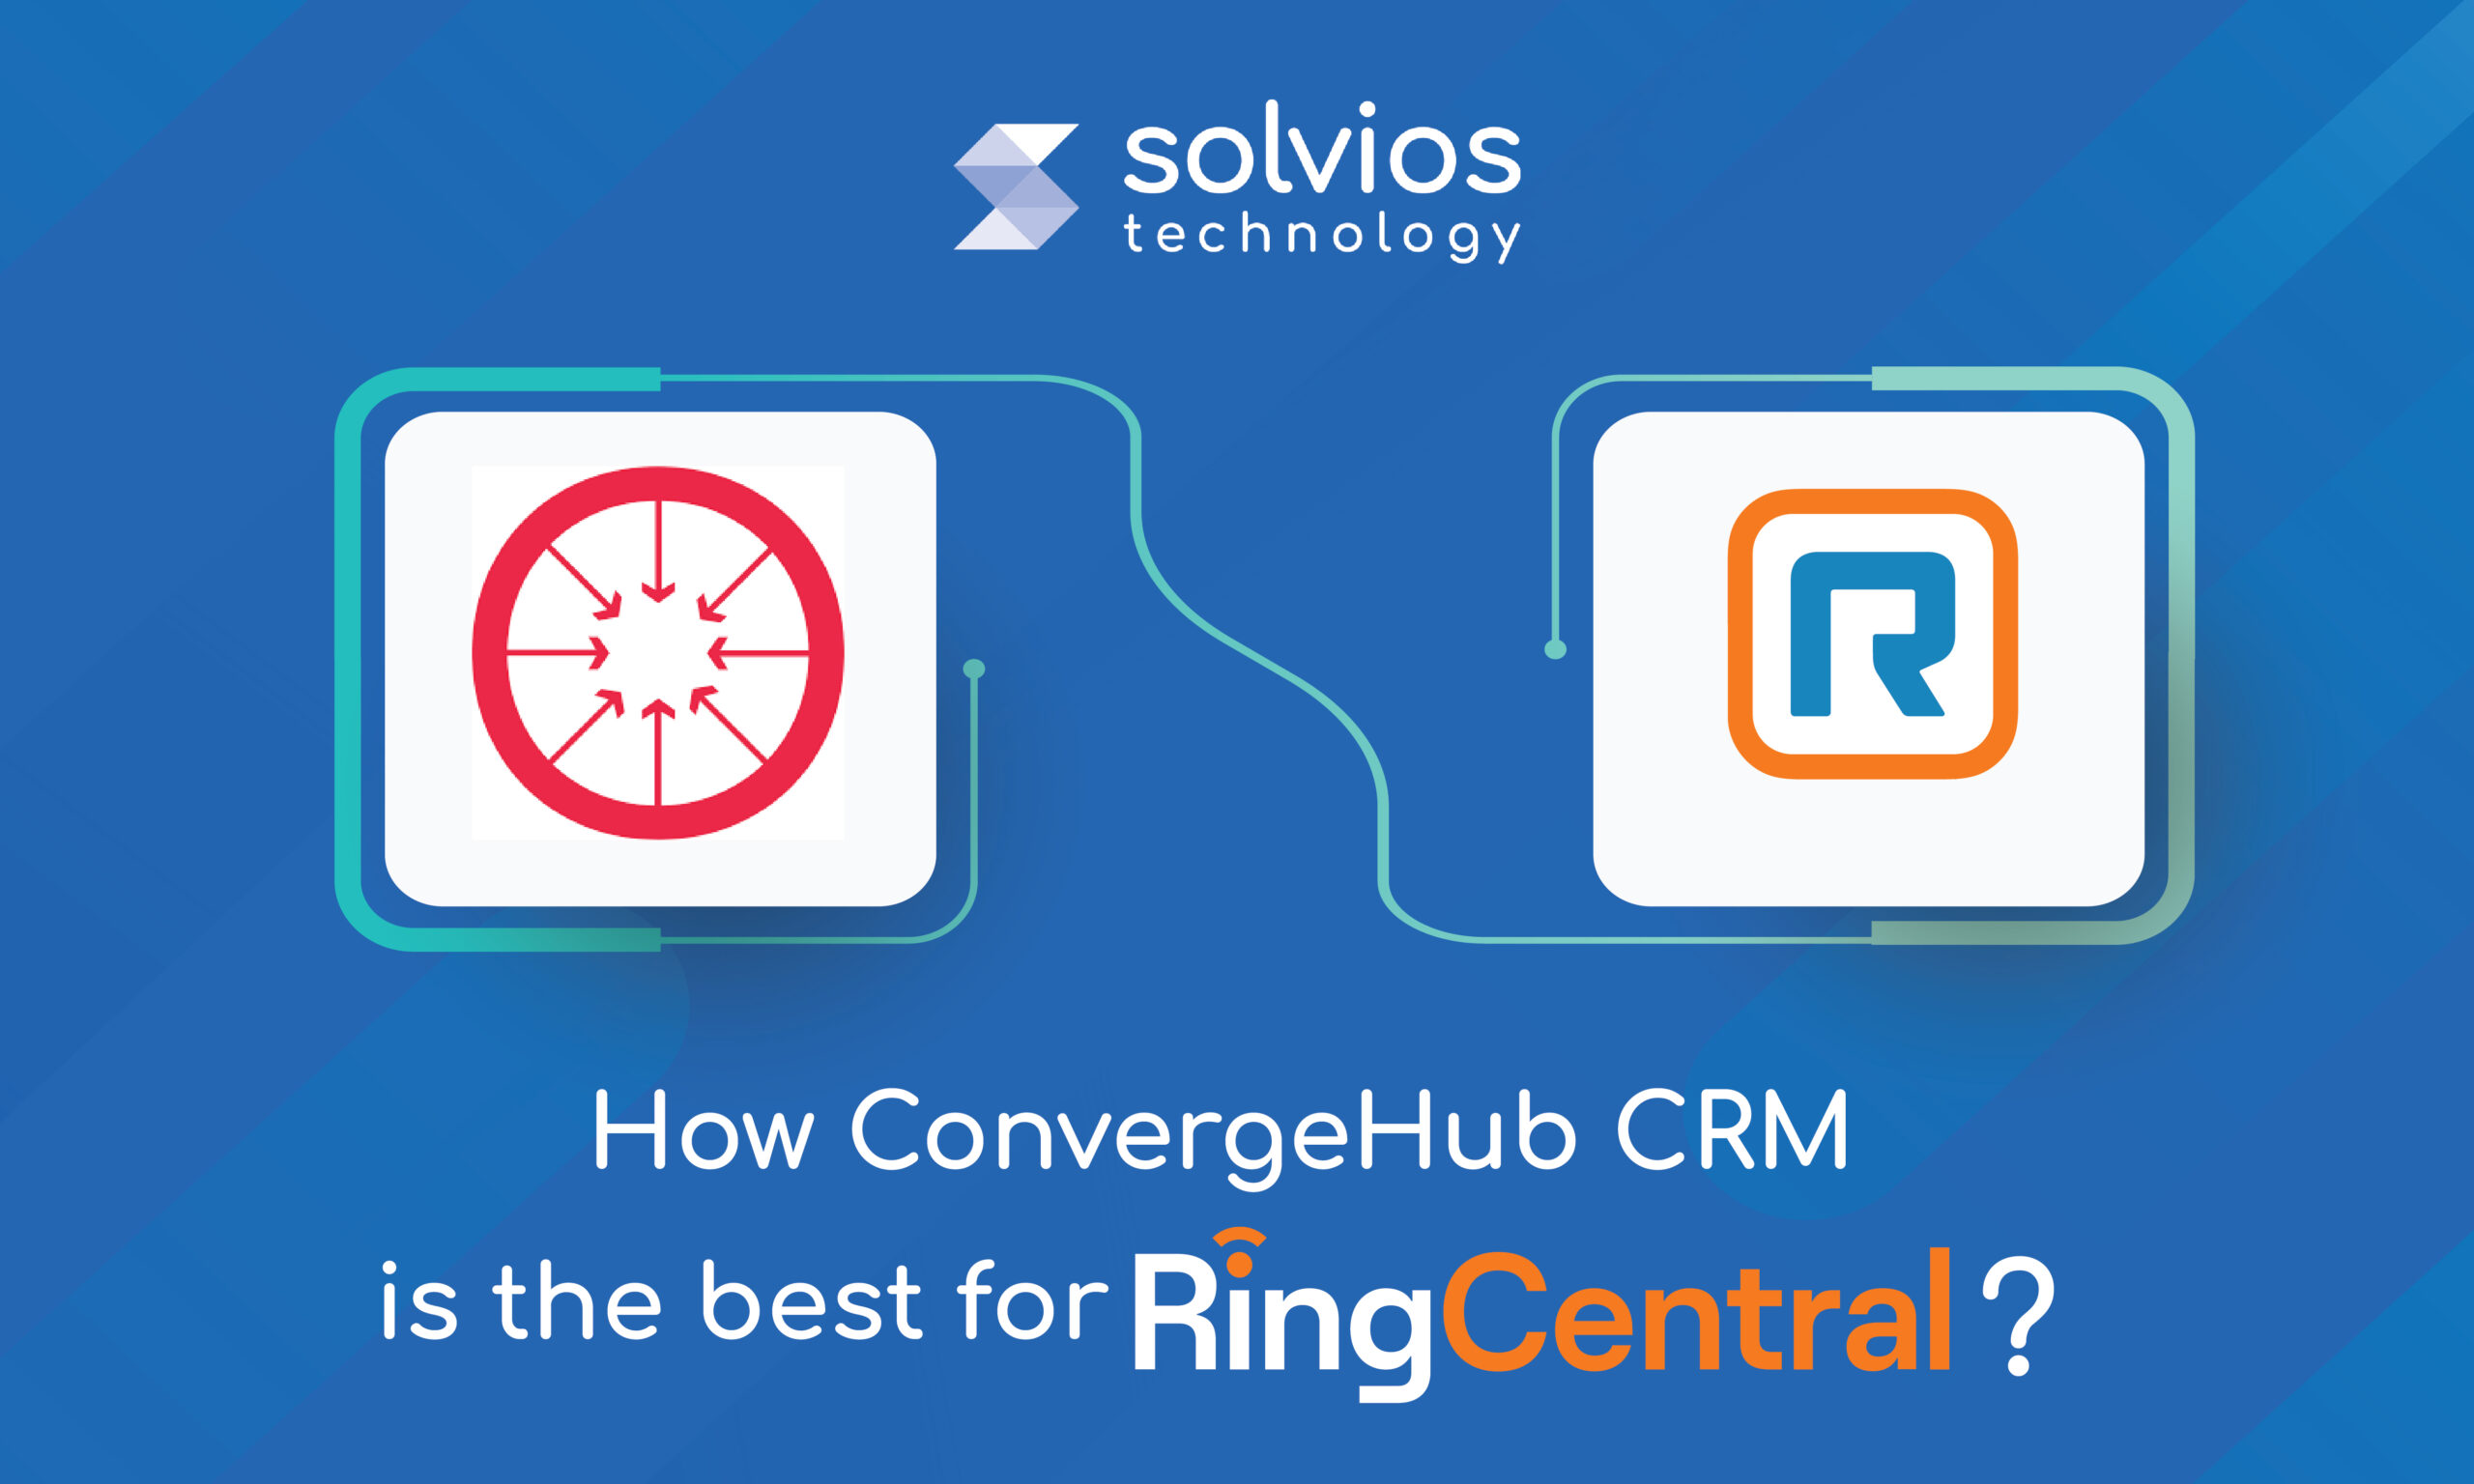 How ConvergeHub CRM is the best for RingCentral